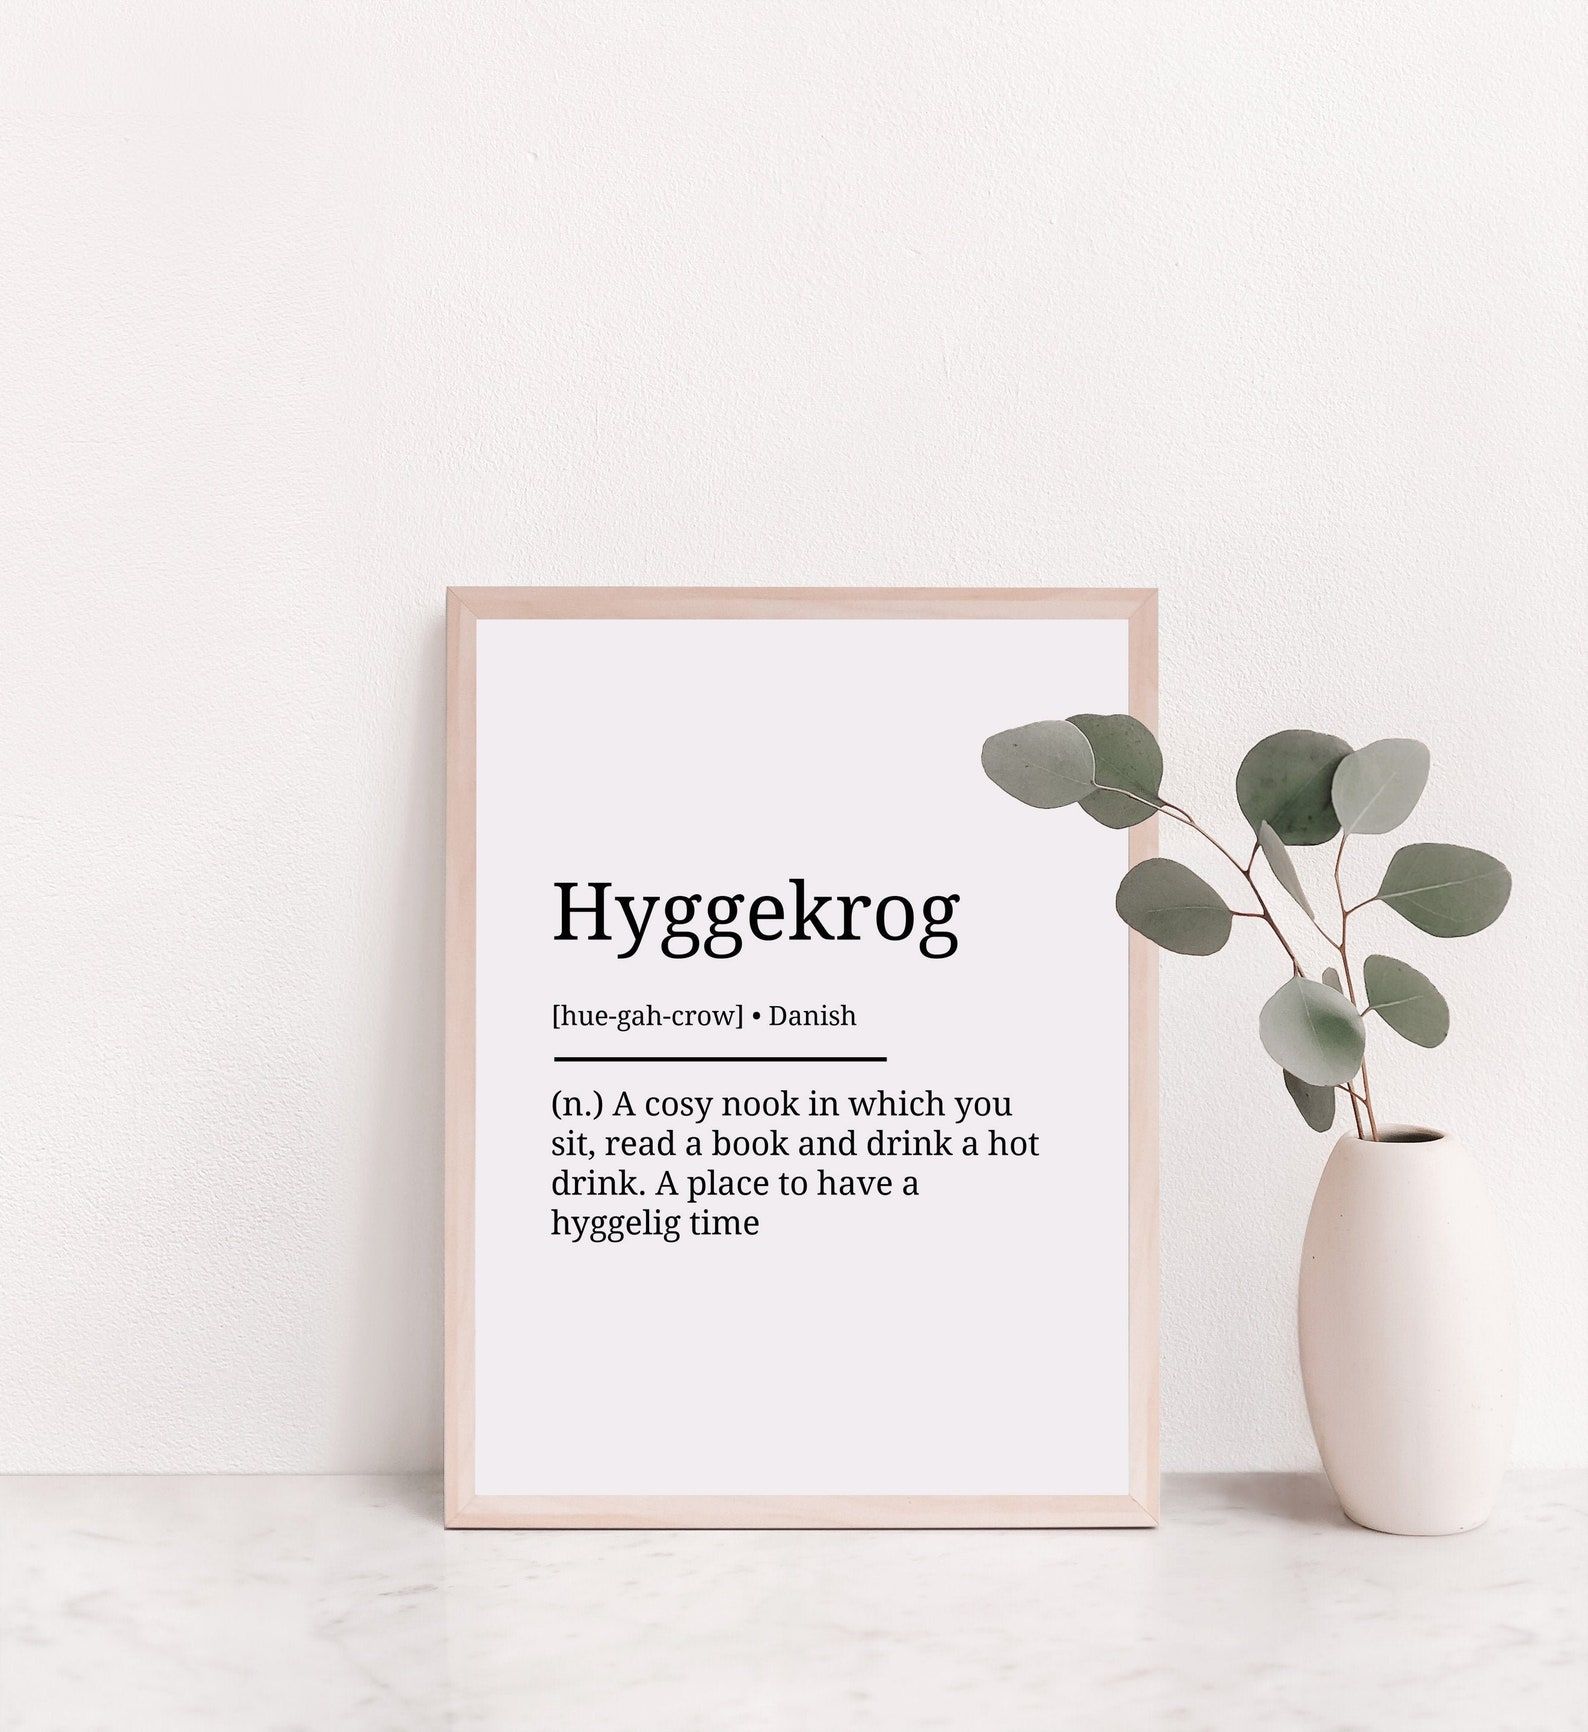 Image of a white print in a white frame. The print reads: "Hyggekrog: A cozy reading nook in which you sit, read a book, and drink a hot drink. A place to have hyggelig time."